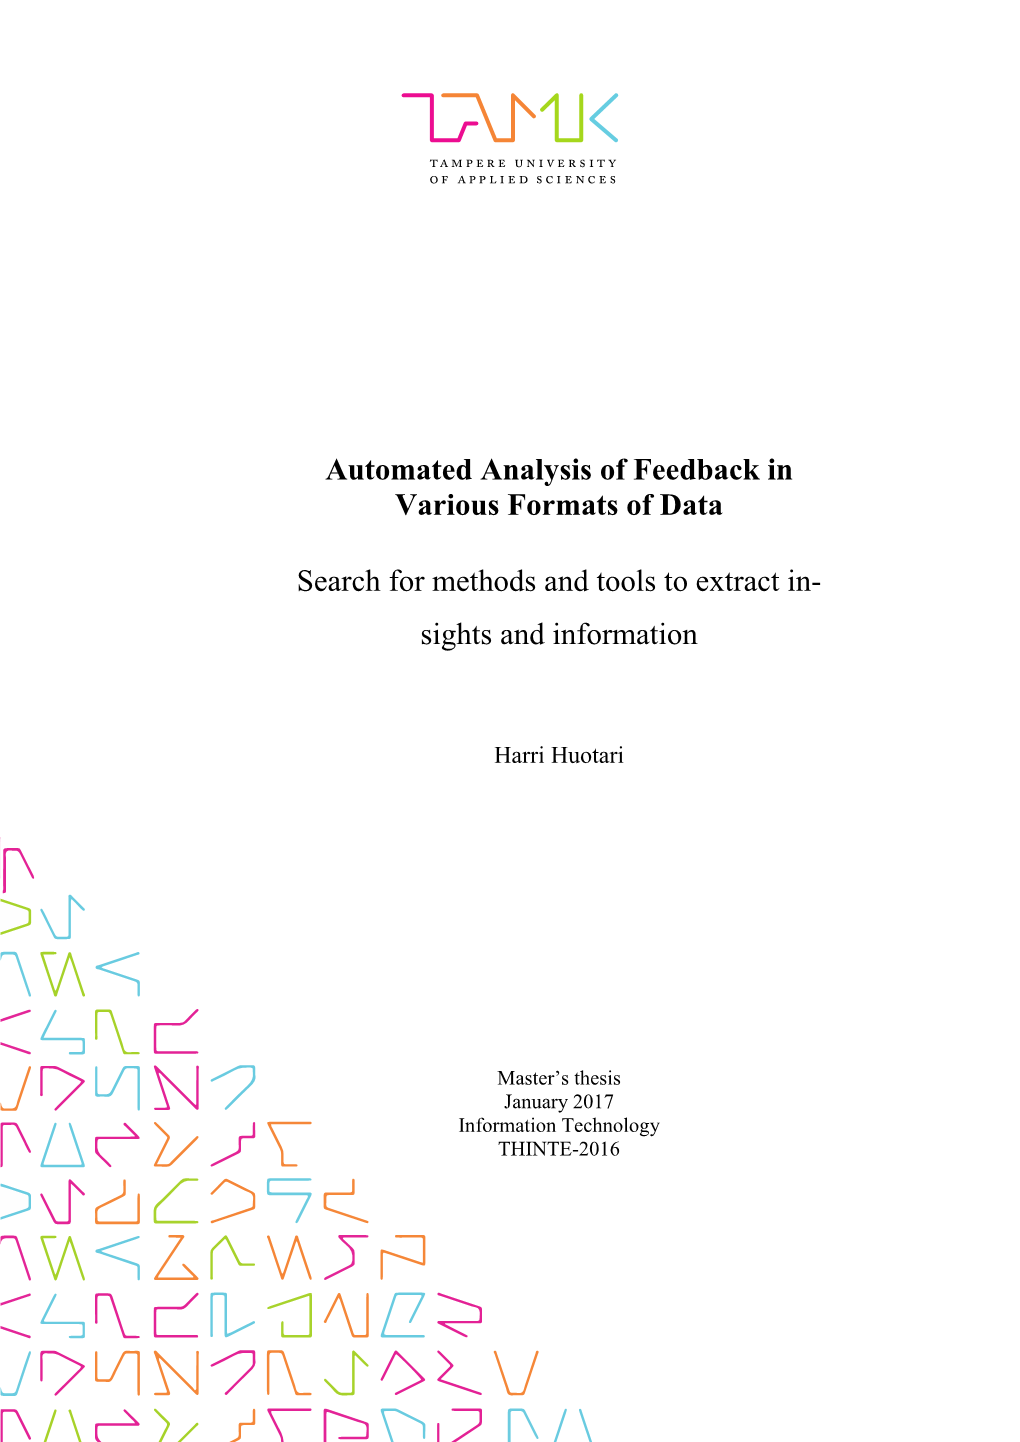 Automated Analysis of Feedback in Various Formats of Data